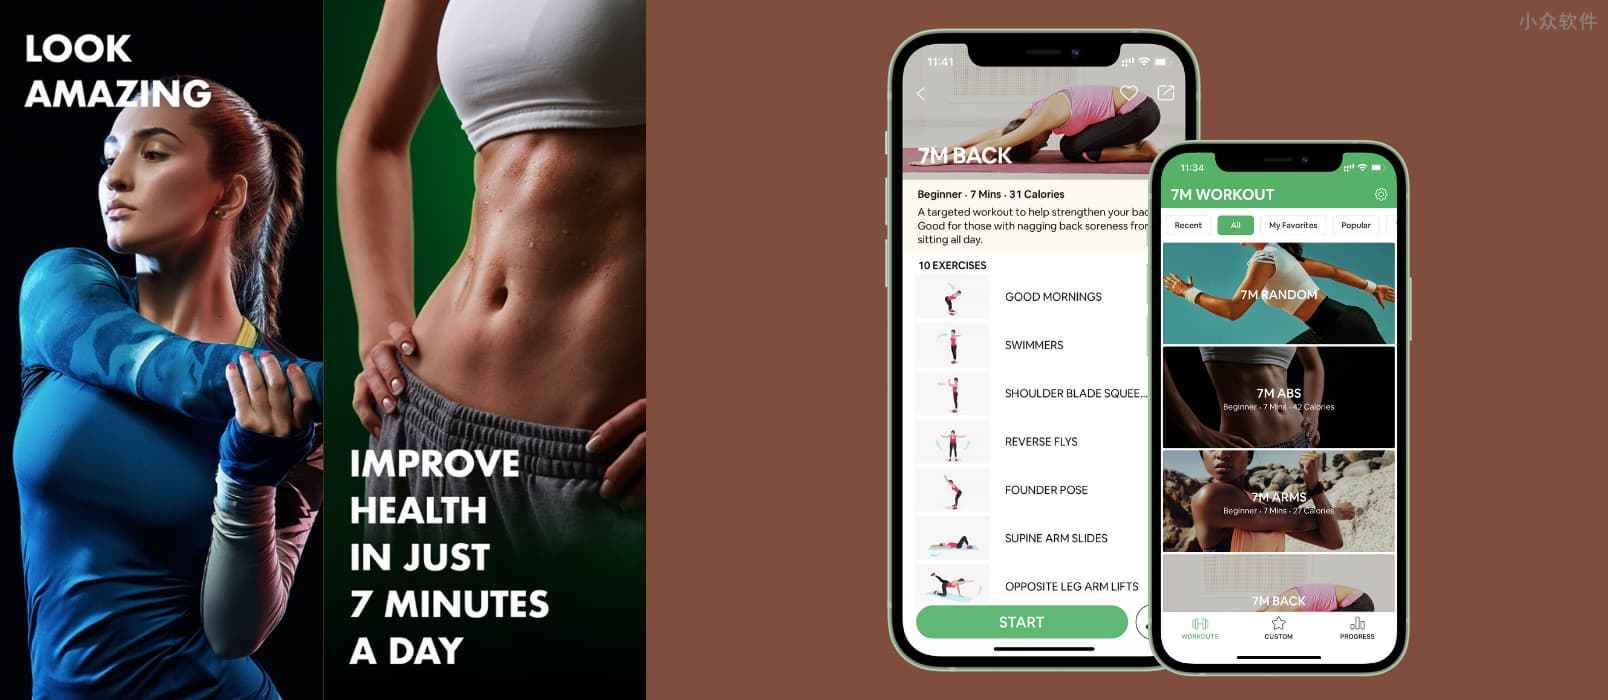 7 Minute Workout – 拥有 30+ 组动作的 7 分钟锻炼健身应用[iPhone/Android]